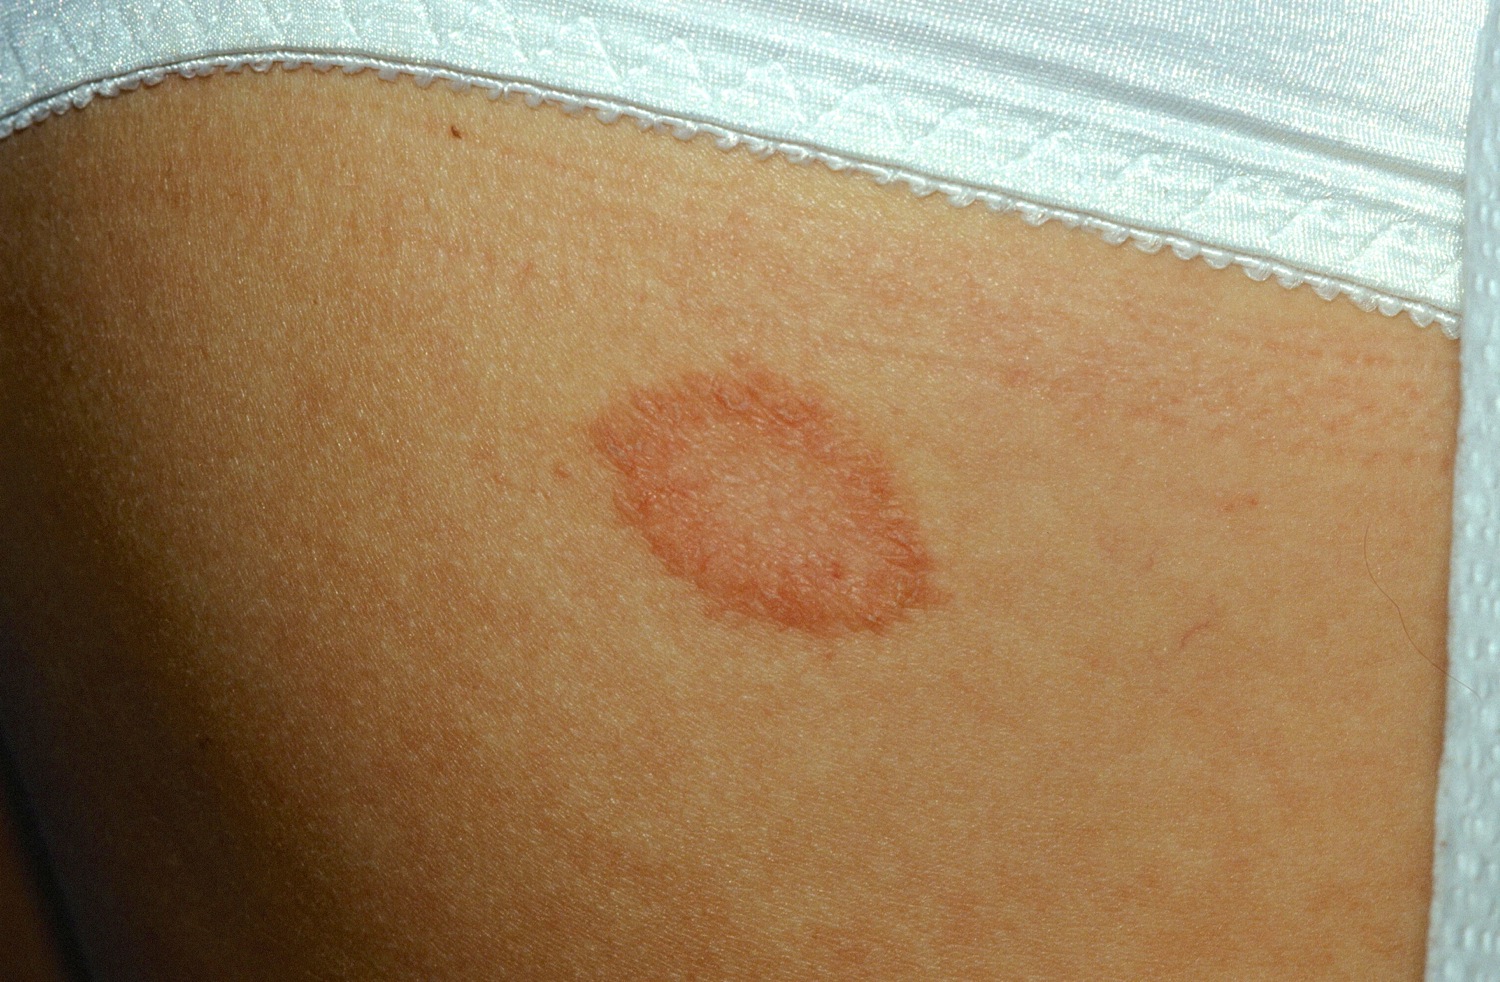 herald patch pityriasis rosea causes